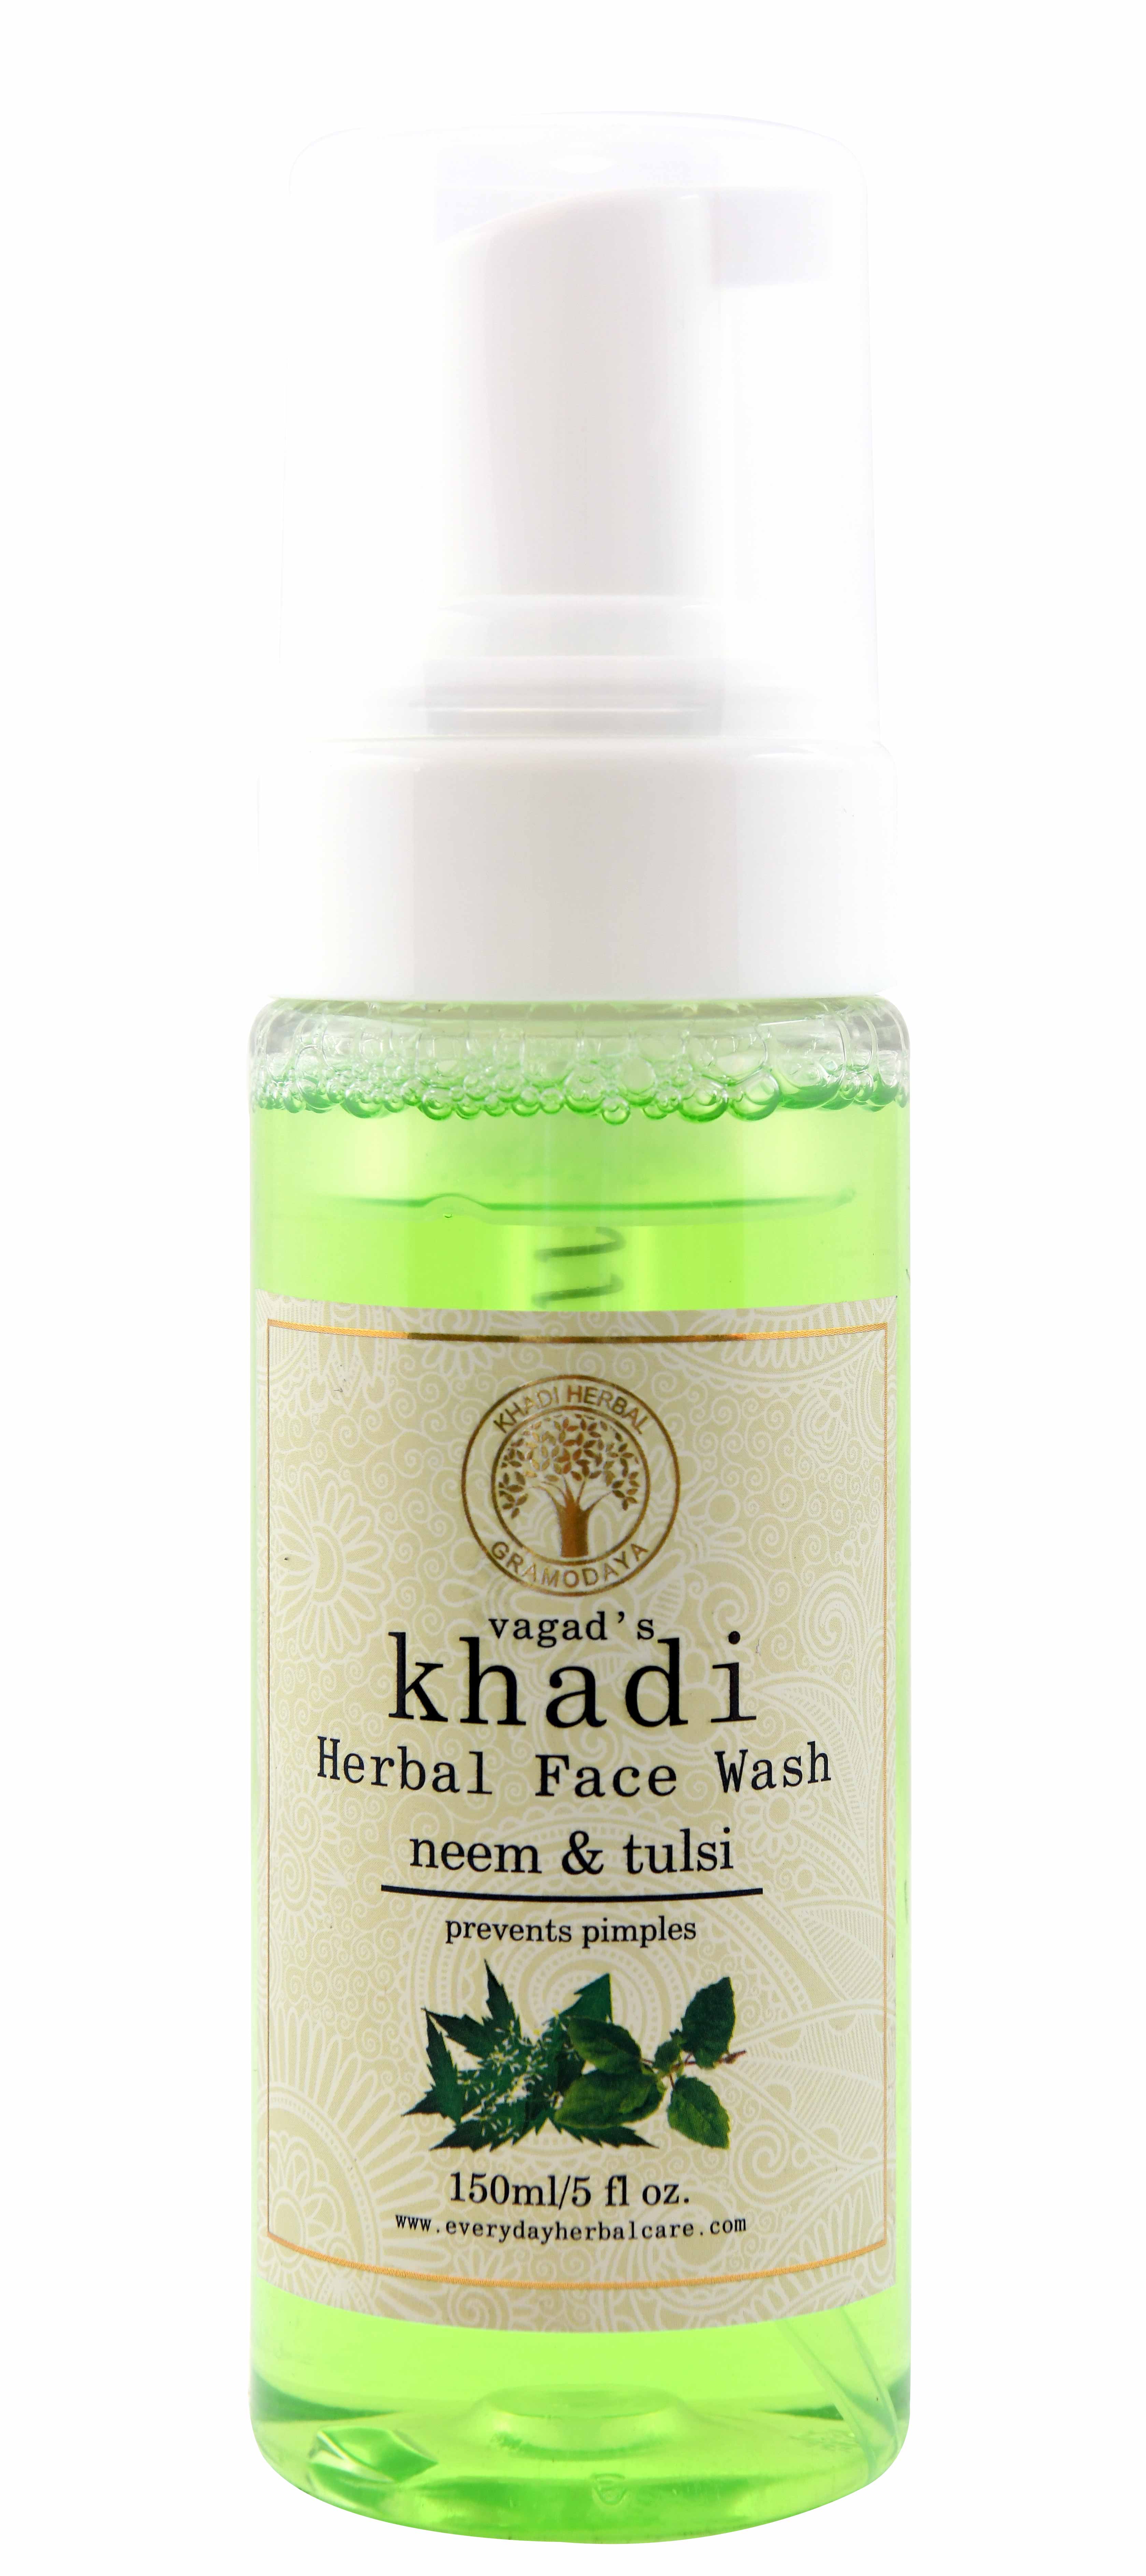 Buy Vagad's Khadi Neem And Tulsi Face Wash at Best Price Online